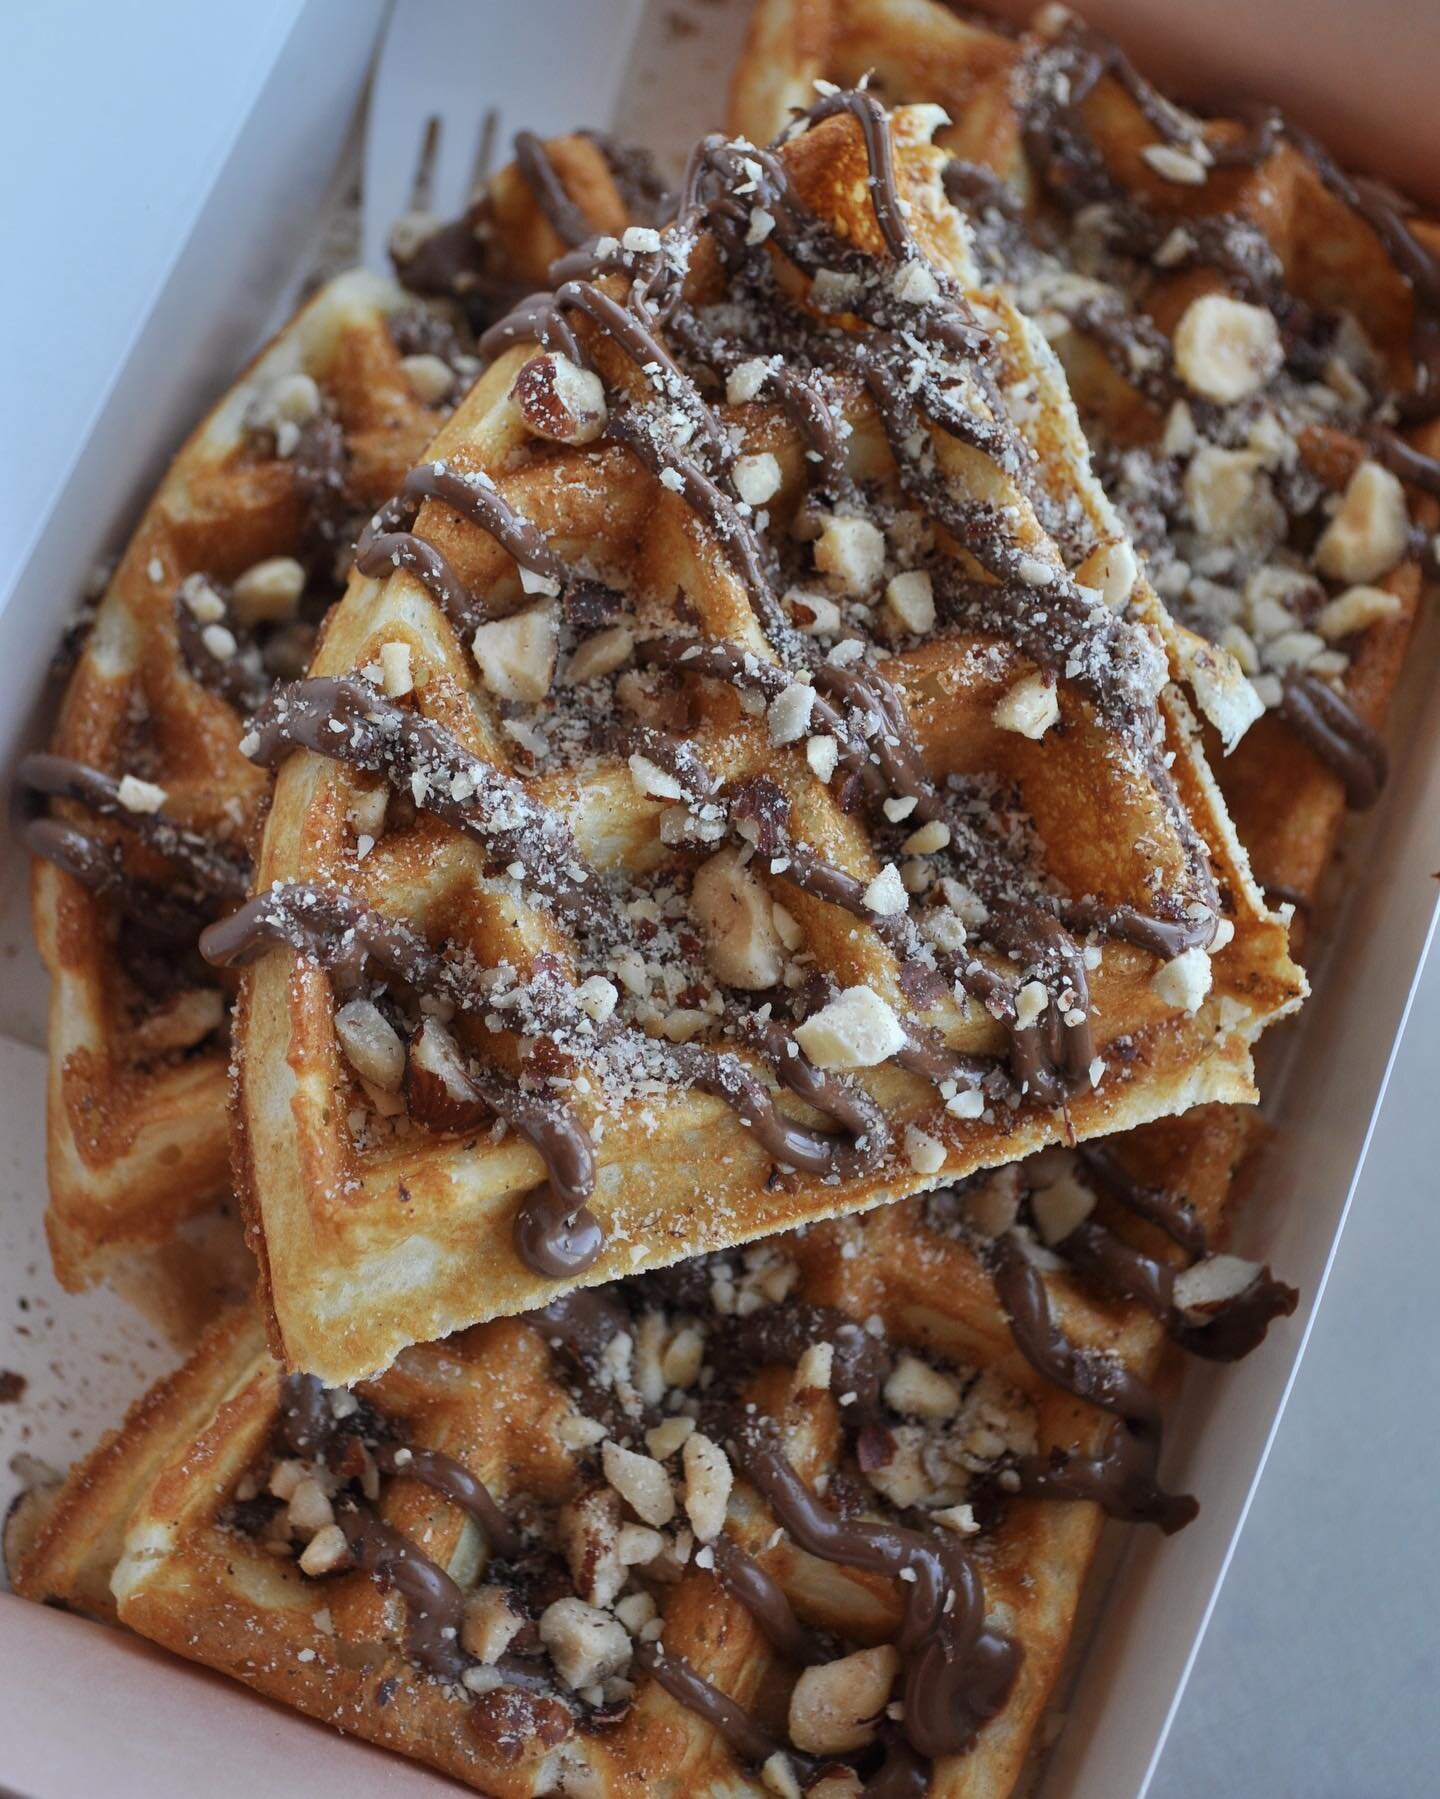 This may be the nicest photo of a NUTELLA HAZELNUT waffle ever published 😋 Trust us when we say that it tastes even better than it looks. See ya soon! 
.
.
.
#xoicecream #madewithlove #madeinyyc #eatlocalyyc #yycfoodies #yycwaffles